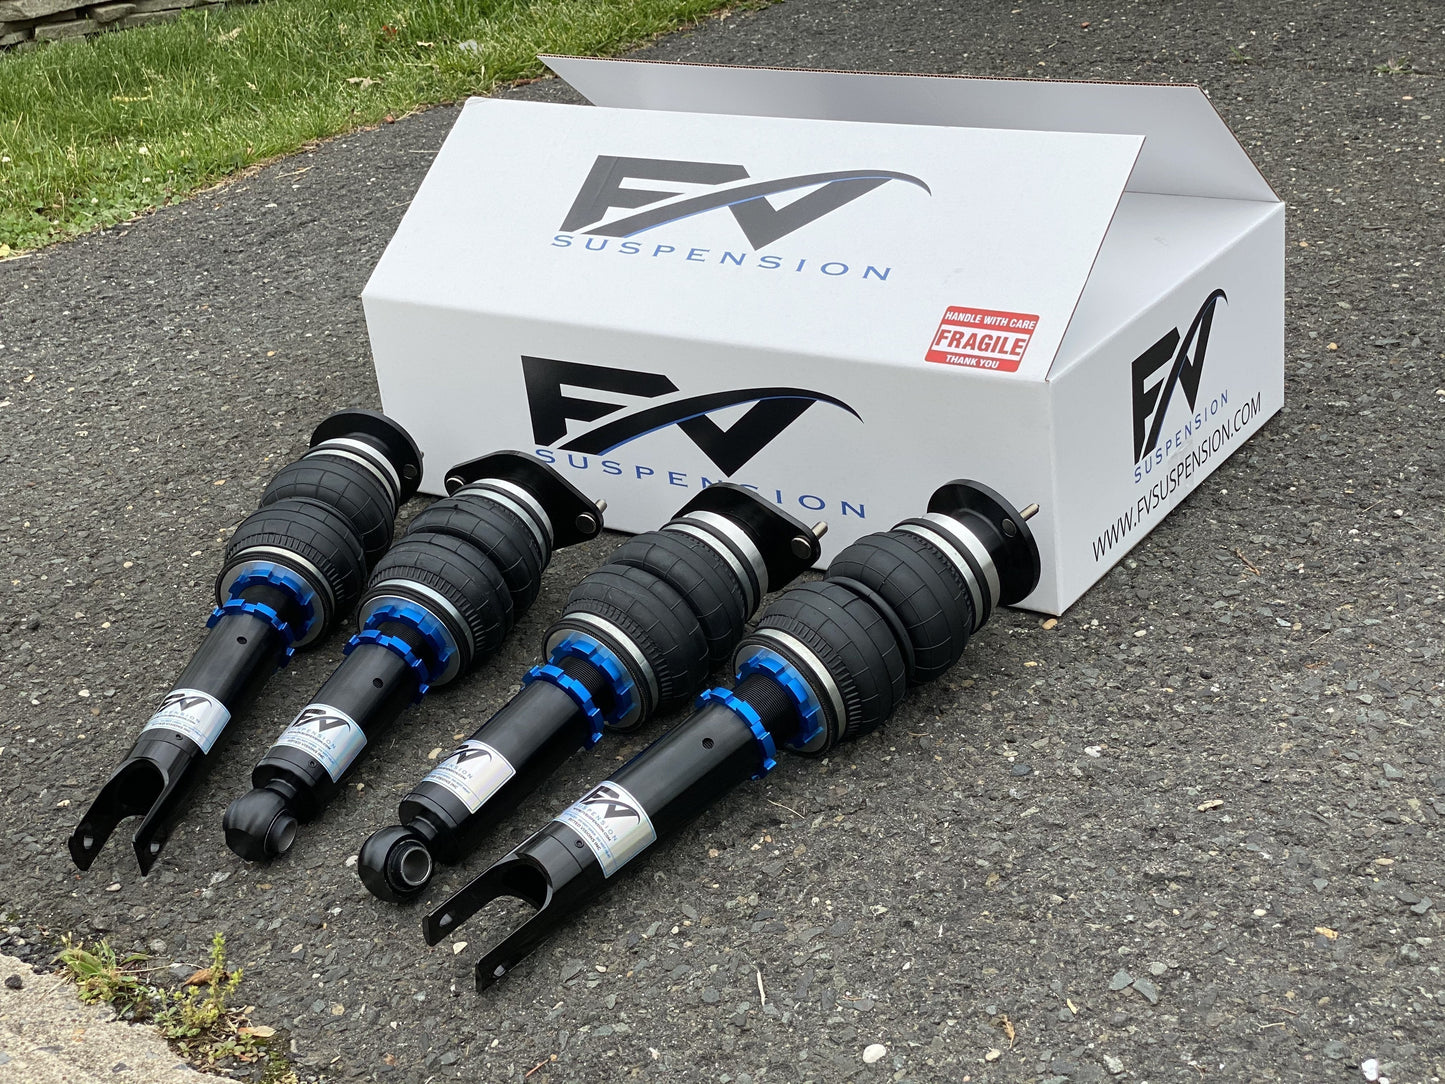 FV Suspension 3H Tier 3 Complete Air Ride kit for 09-16 Audi A4 AWD B8 B8.5 - Full Kit